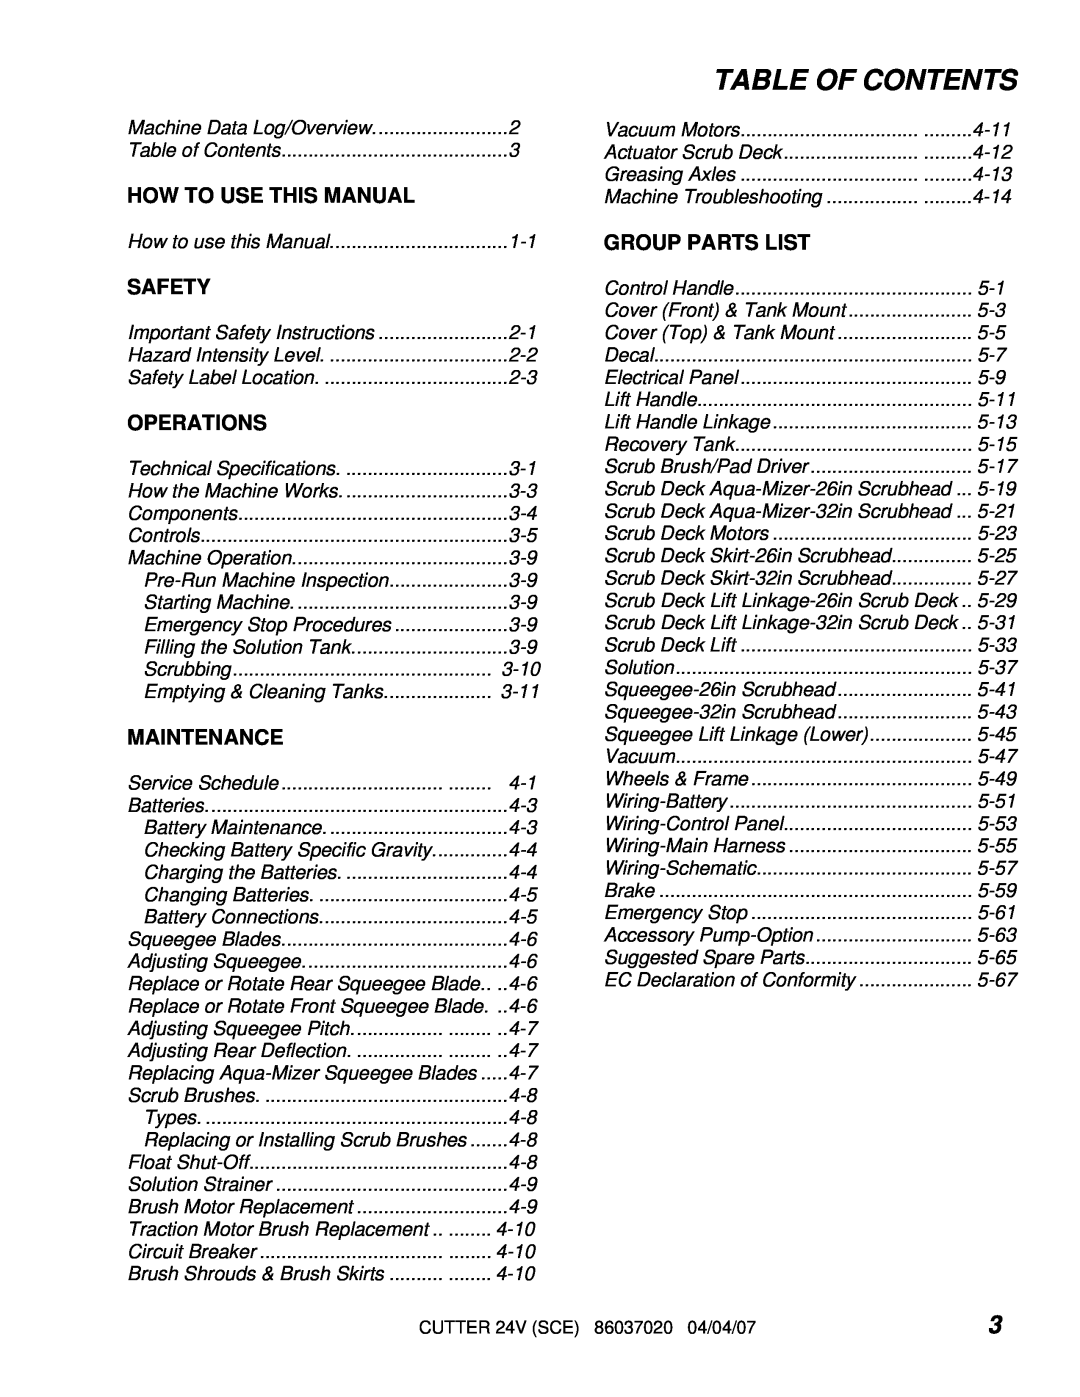 Windsor 86037020, SCEOX264 Table Of Contents, How To Use This Manual, Safety, Operations, Maintenance, Group Parts List 